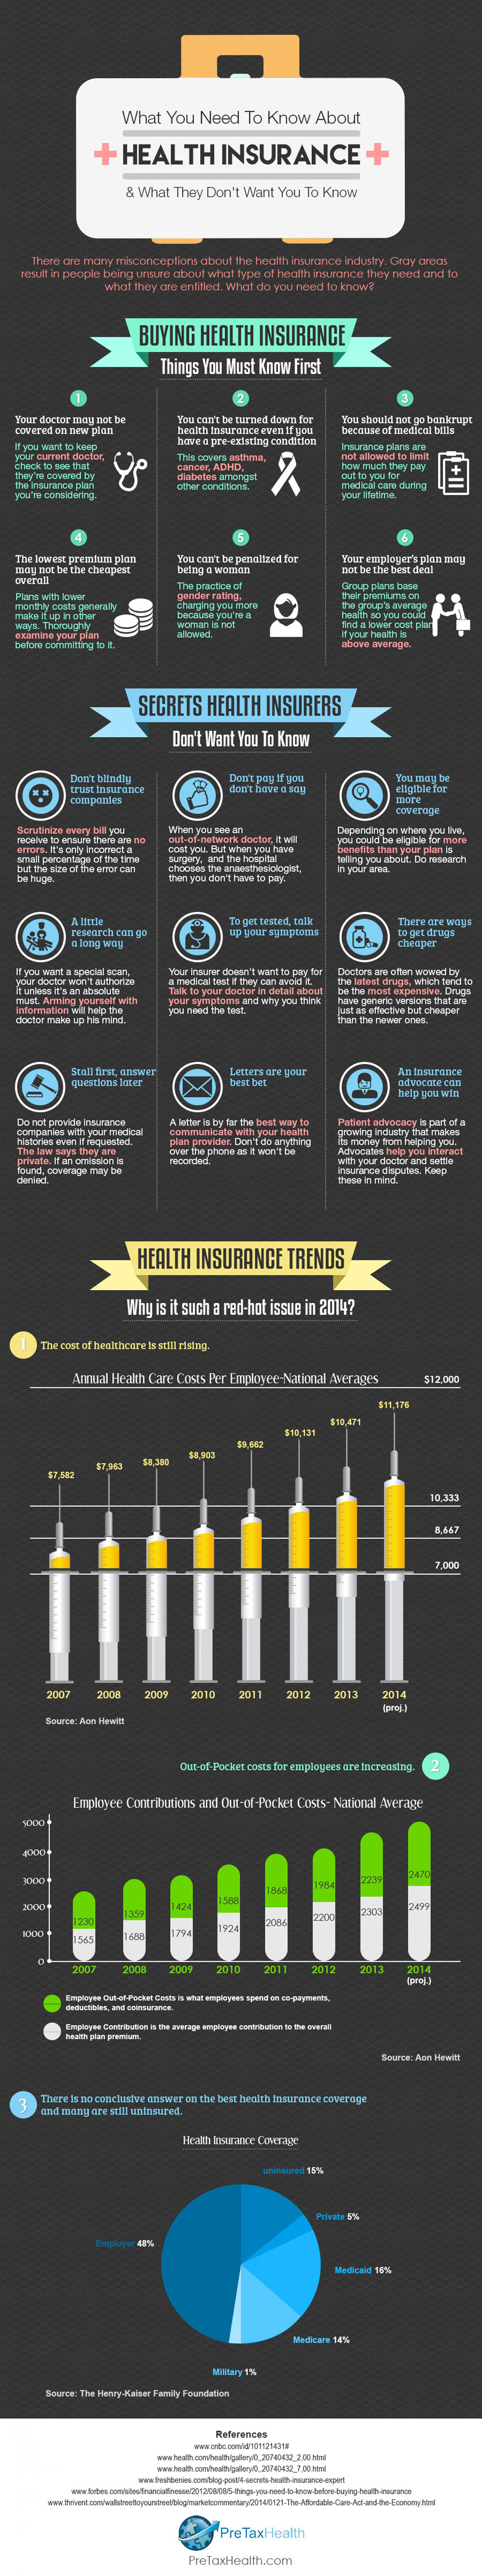 What You Need to Know about Health Insurance Infographic